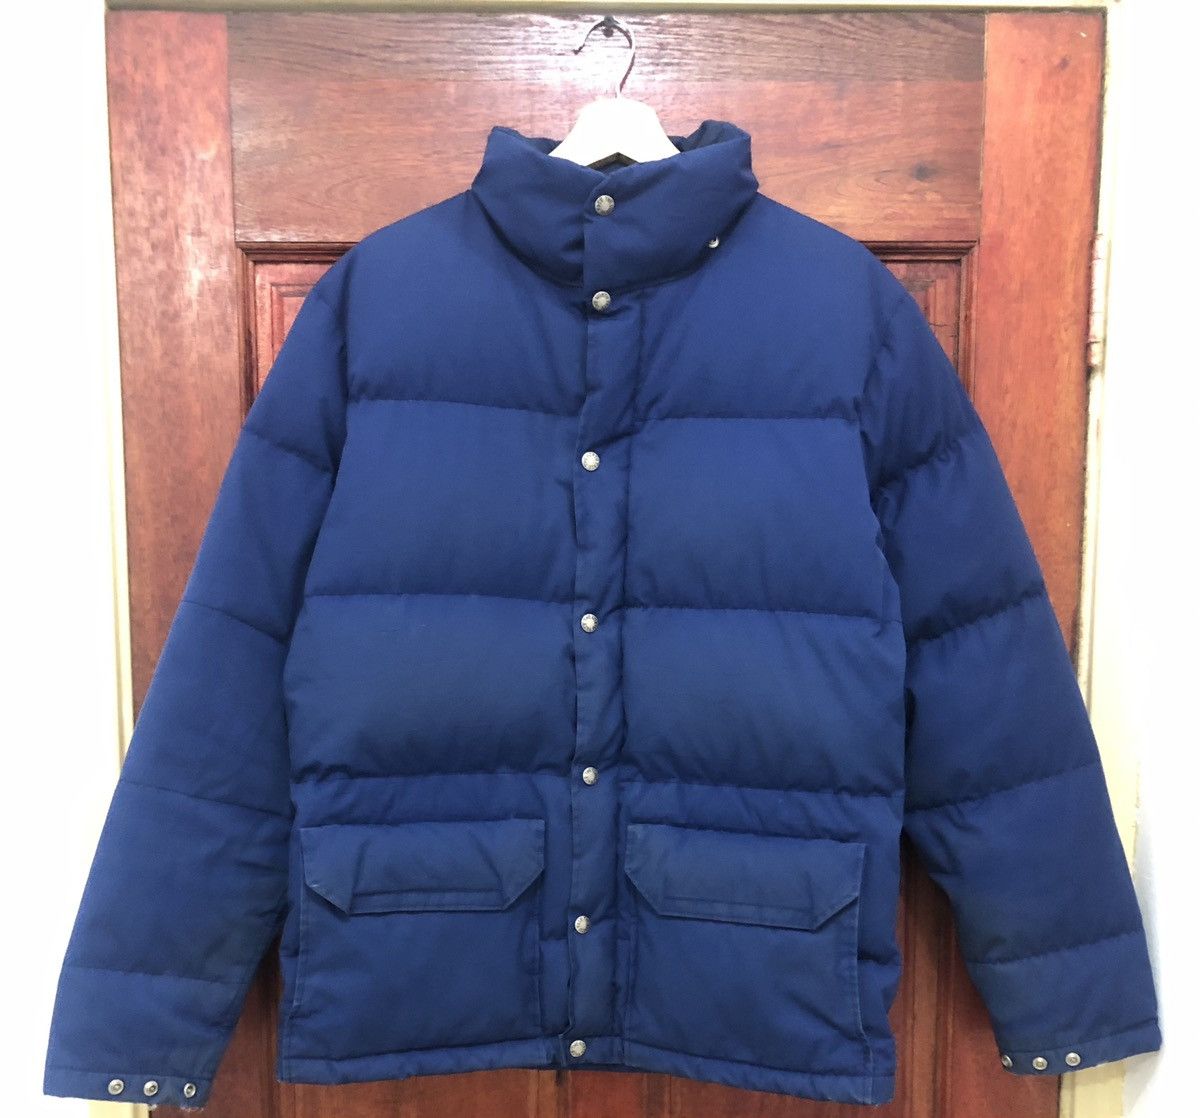 Vintage 90s The North Face Puffer Jacket - 1